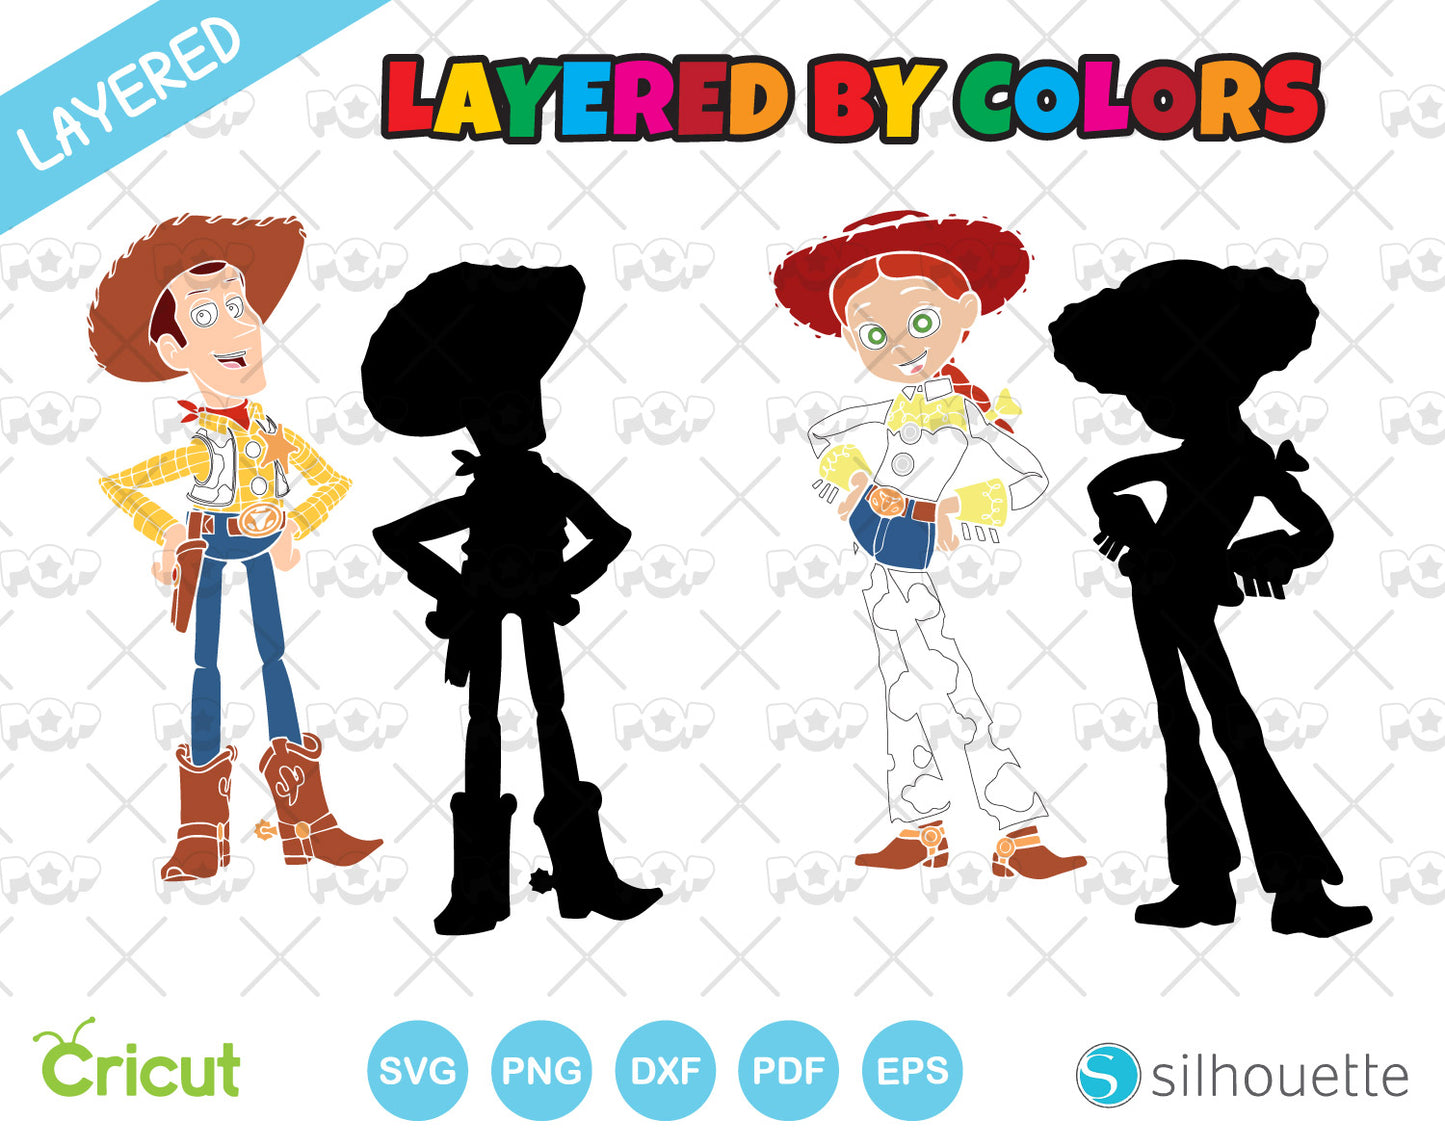 Toy Story clipart set, Toy Story SVG cut files for Cricut / Silhouette, PNG, DXF, instant download